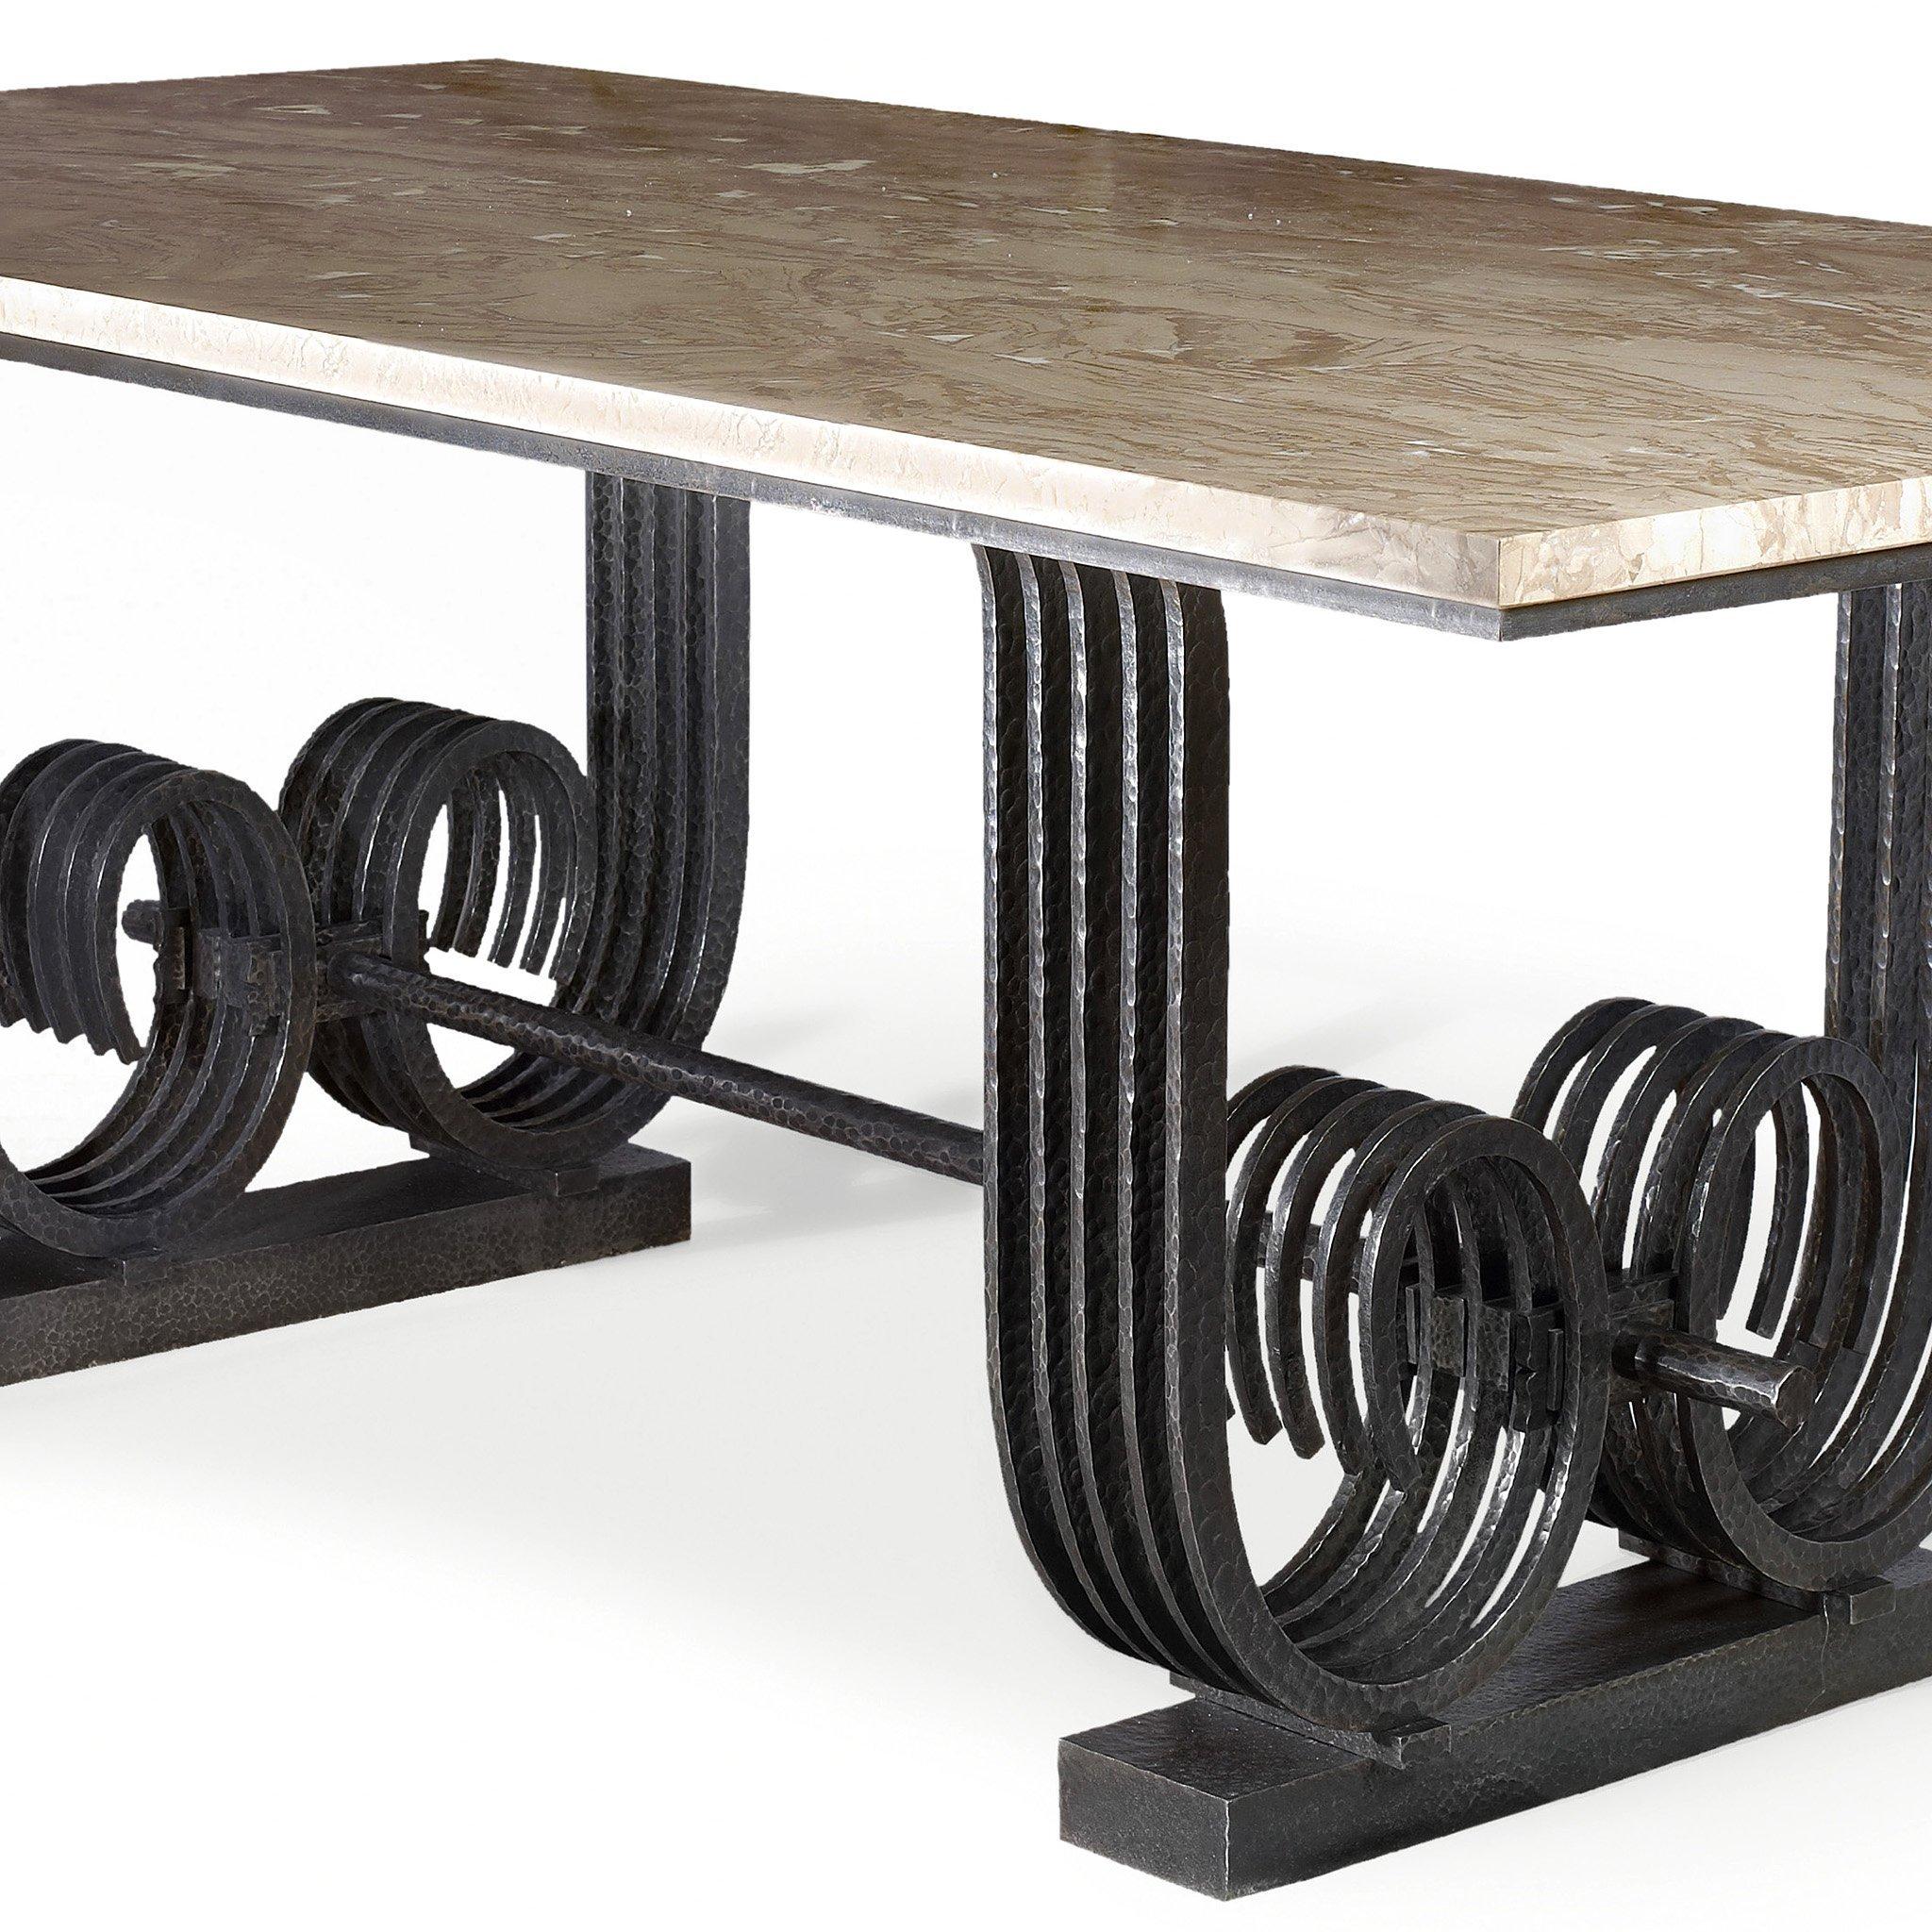 A French Art Deco dining table by Raymond Subes. The table features wrought iron with martelé finish, with a Grand Napoléon marble top. Perfectly exemplifying the heights of the Art Deco aesthetic, this noteworthy piece, a full dining table, by